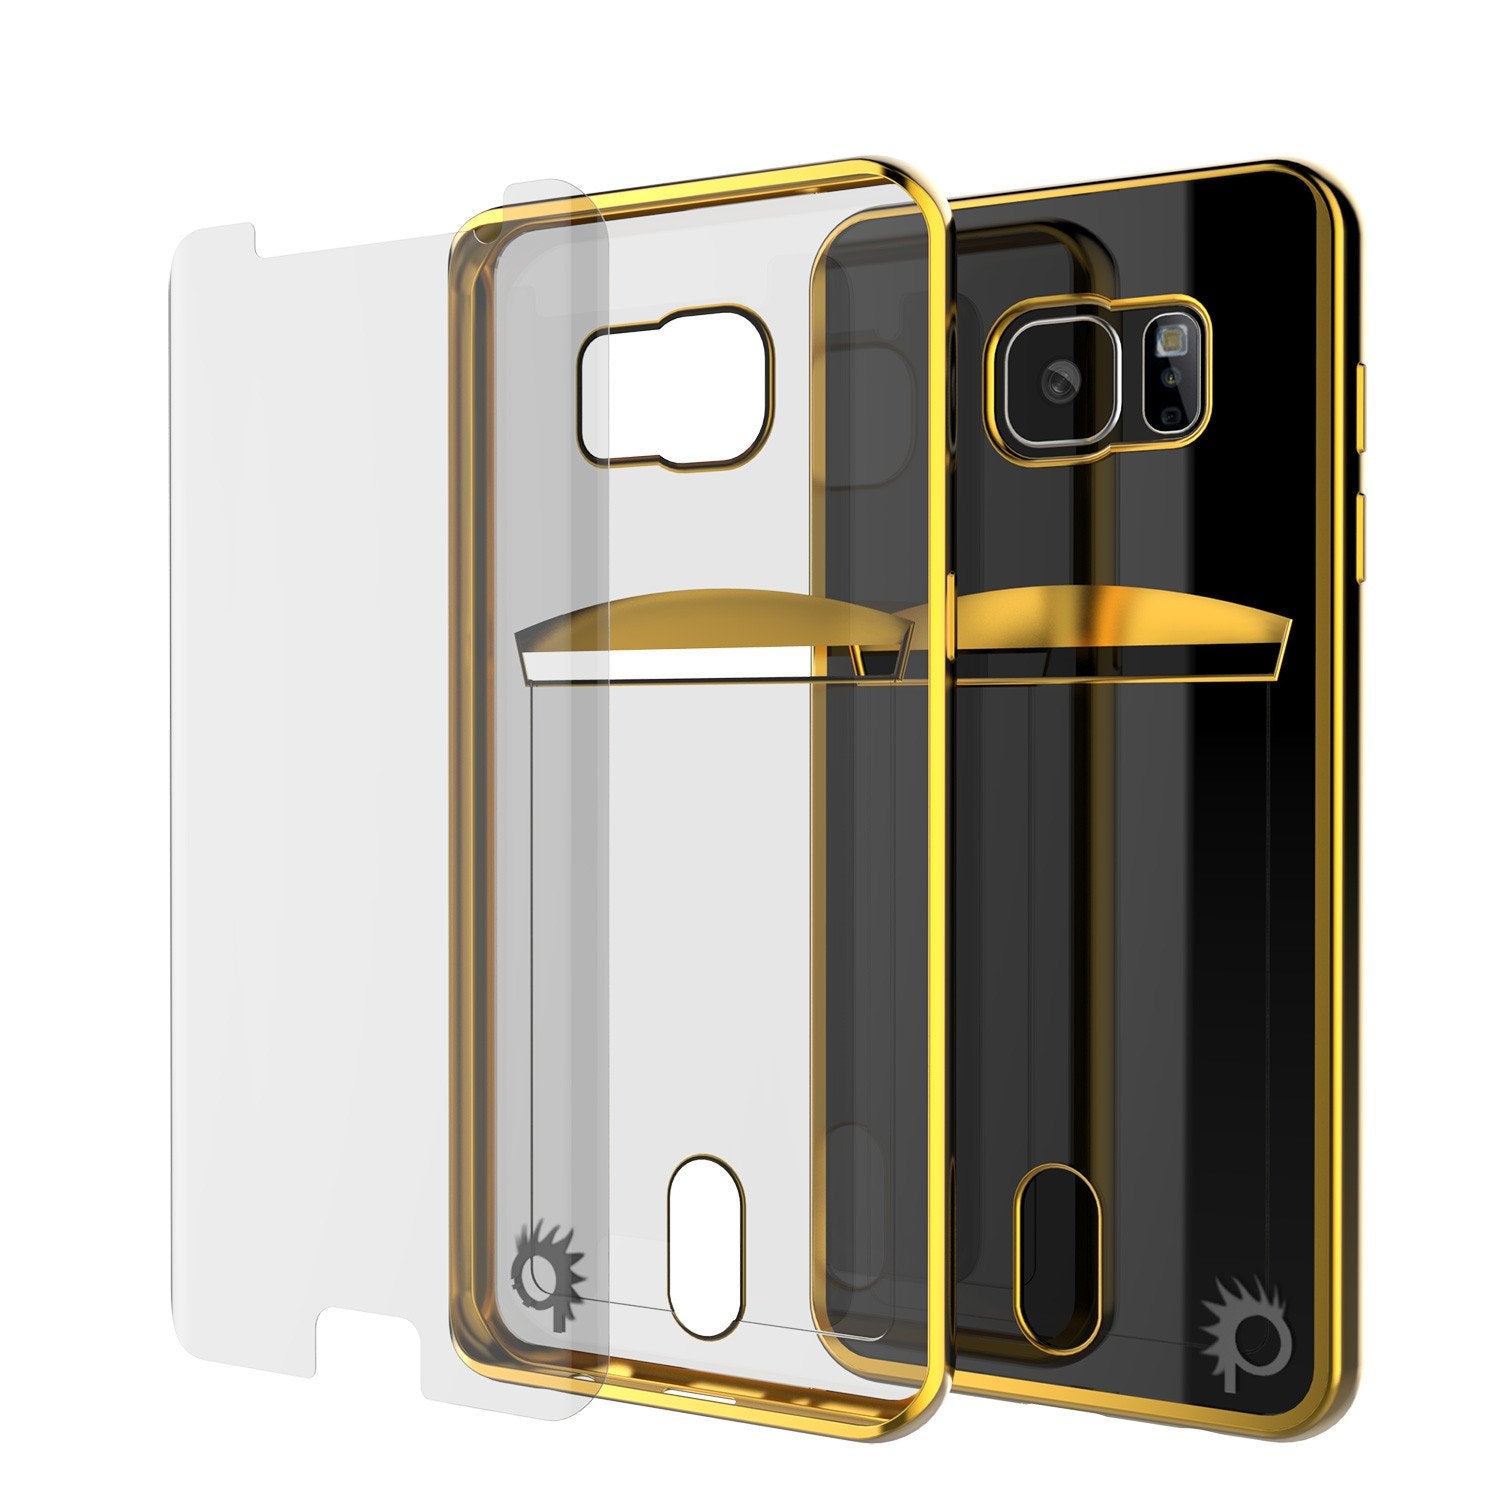 Galaxy S6 Case, PUNKCASE® LUCID Gold Series | Card Slot | SHIELD Screen Protector | Ultra fit